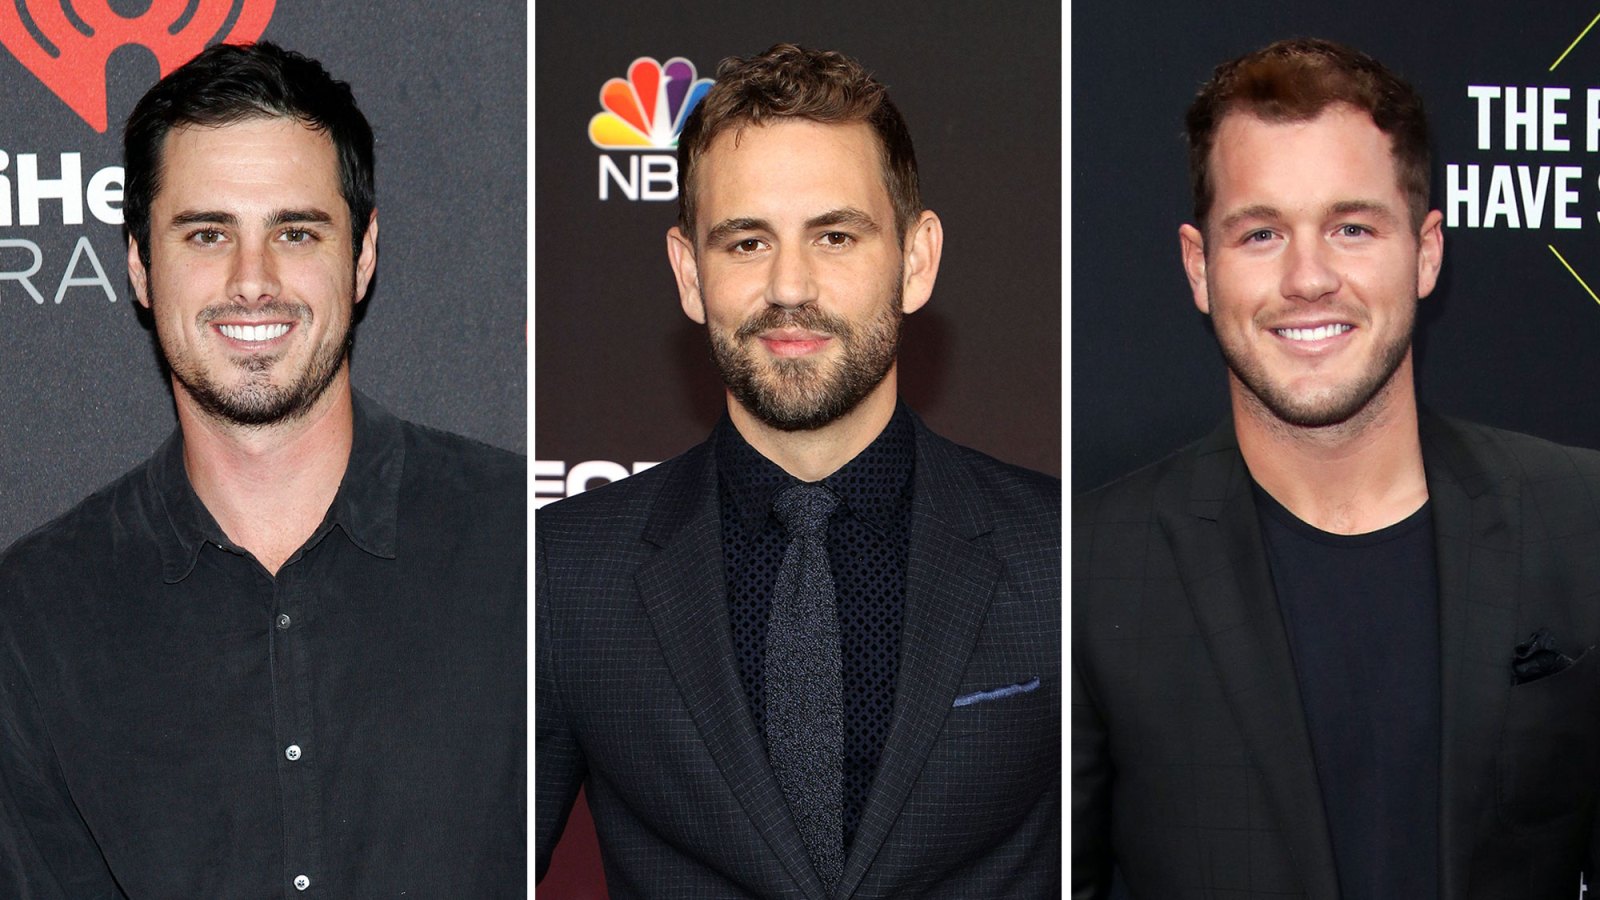 Ben Higgins and Nick Viall Deny Colton Underwood’s Claim No One From Bachelor Nation Reached Out When He Came Out